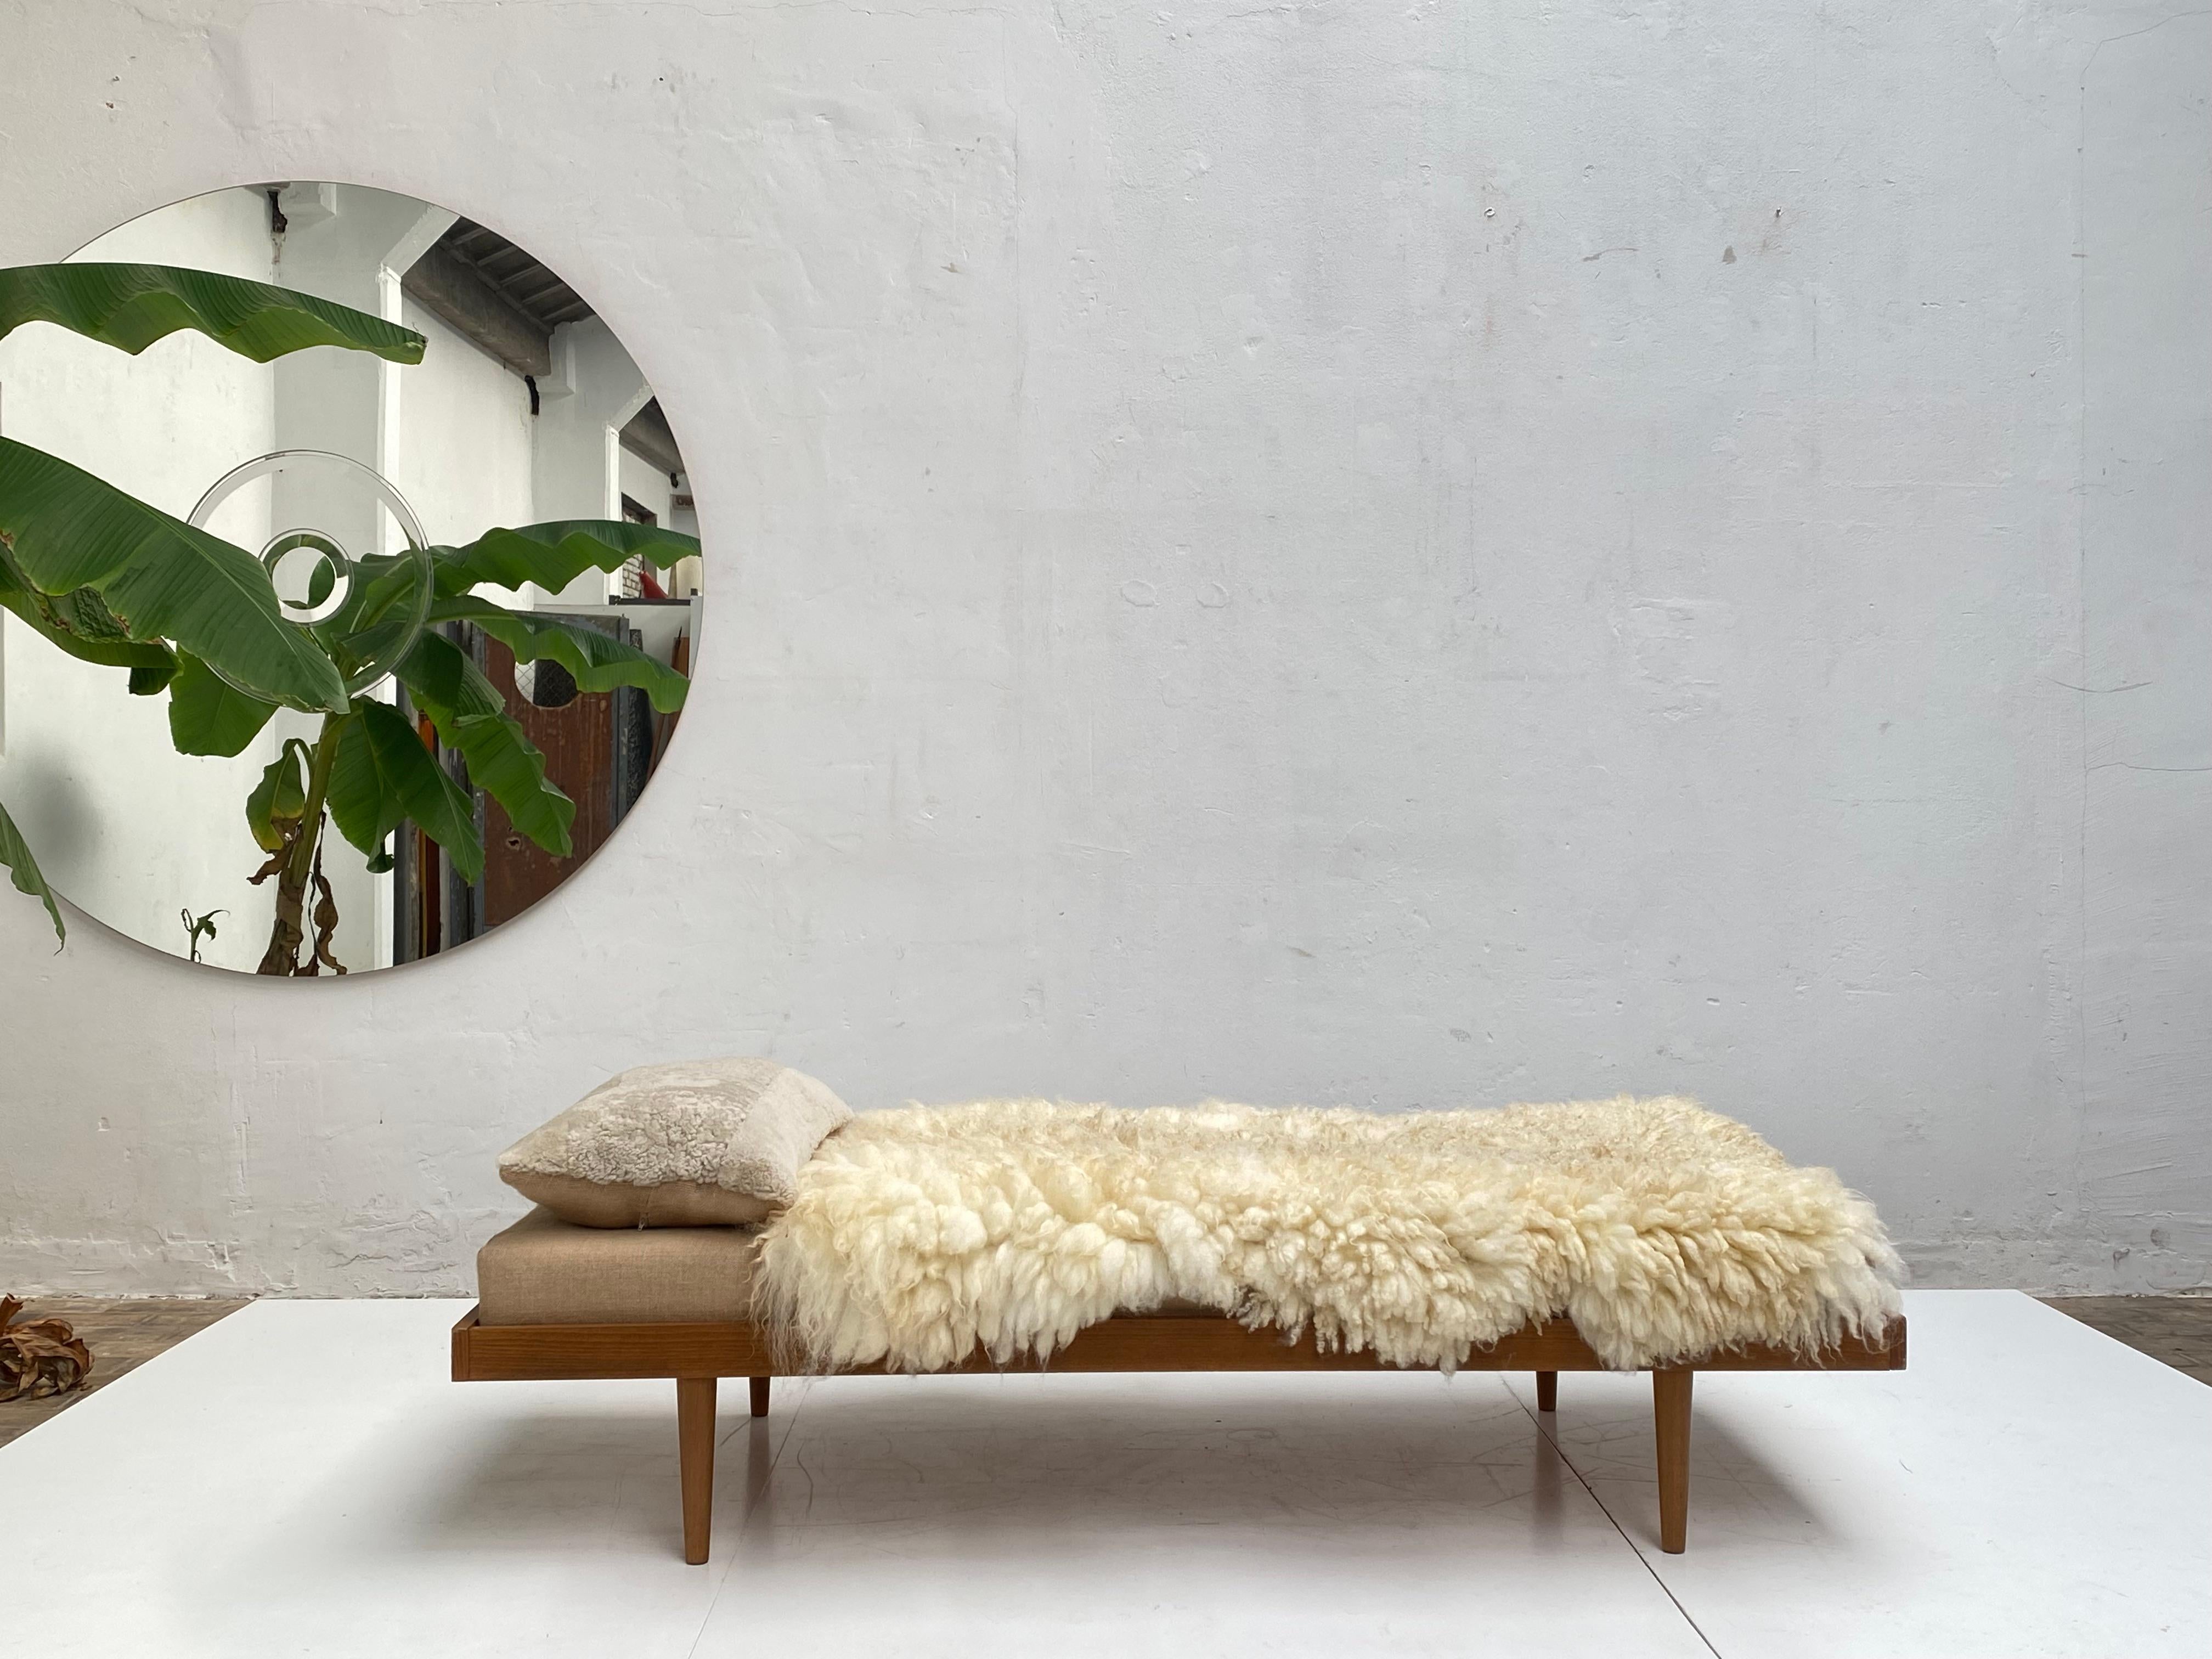 This 1950's Danish minimal Teak wood daybed has been custom upholstered with a raw Cotton mattress & felted wool rug

The wool comes from a cross breed Wensleydale & Texel sheep that has been felted by hand 

Felting wool is a no kill method to